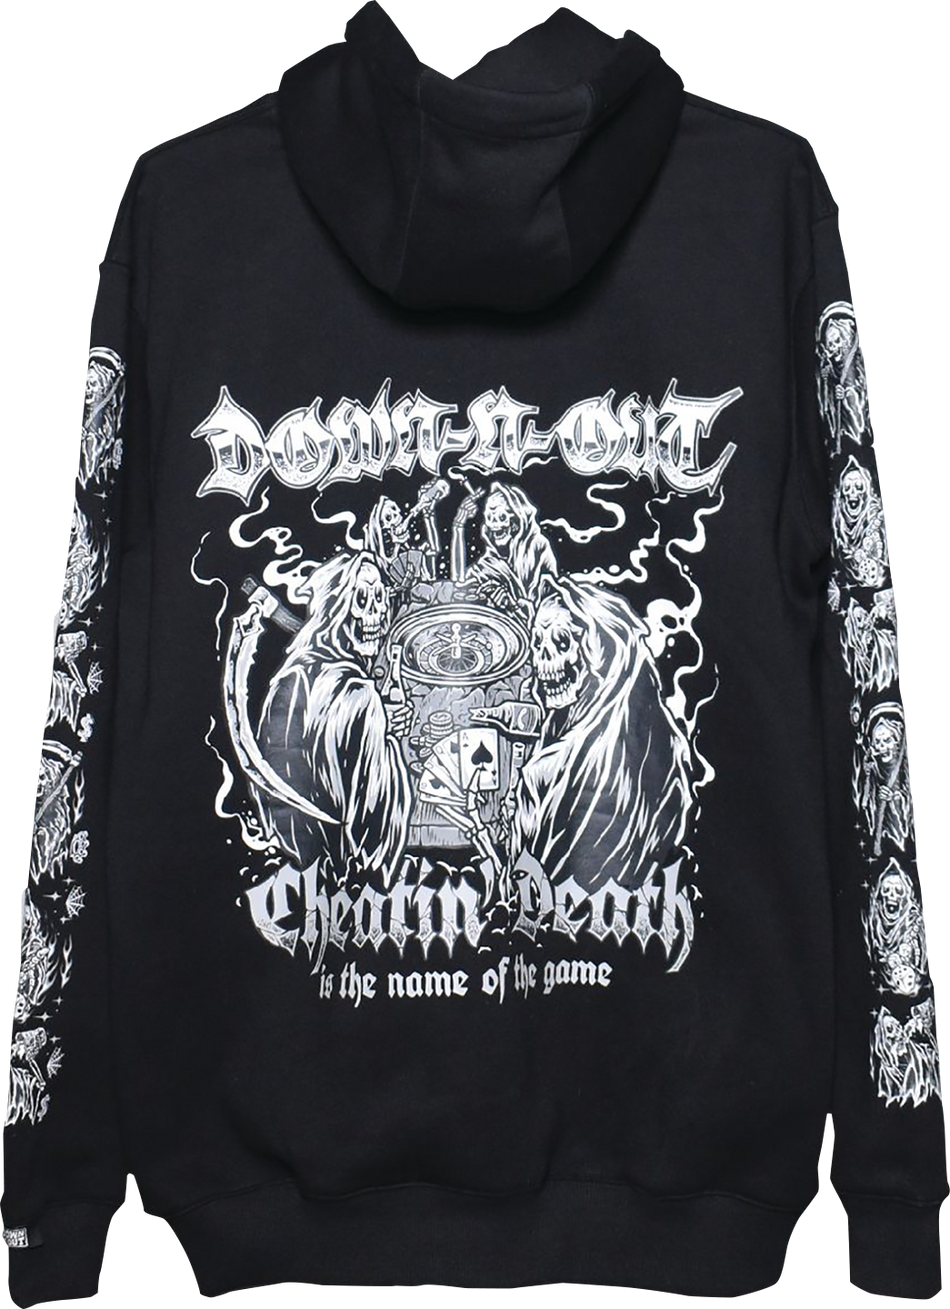 LETHAL THREAT Down-N-Out Cheating Death Hoodie - Black - 2XL DT10054XXL